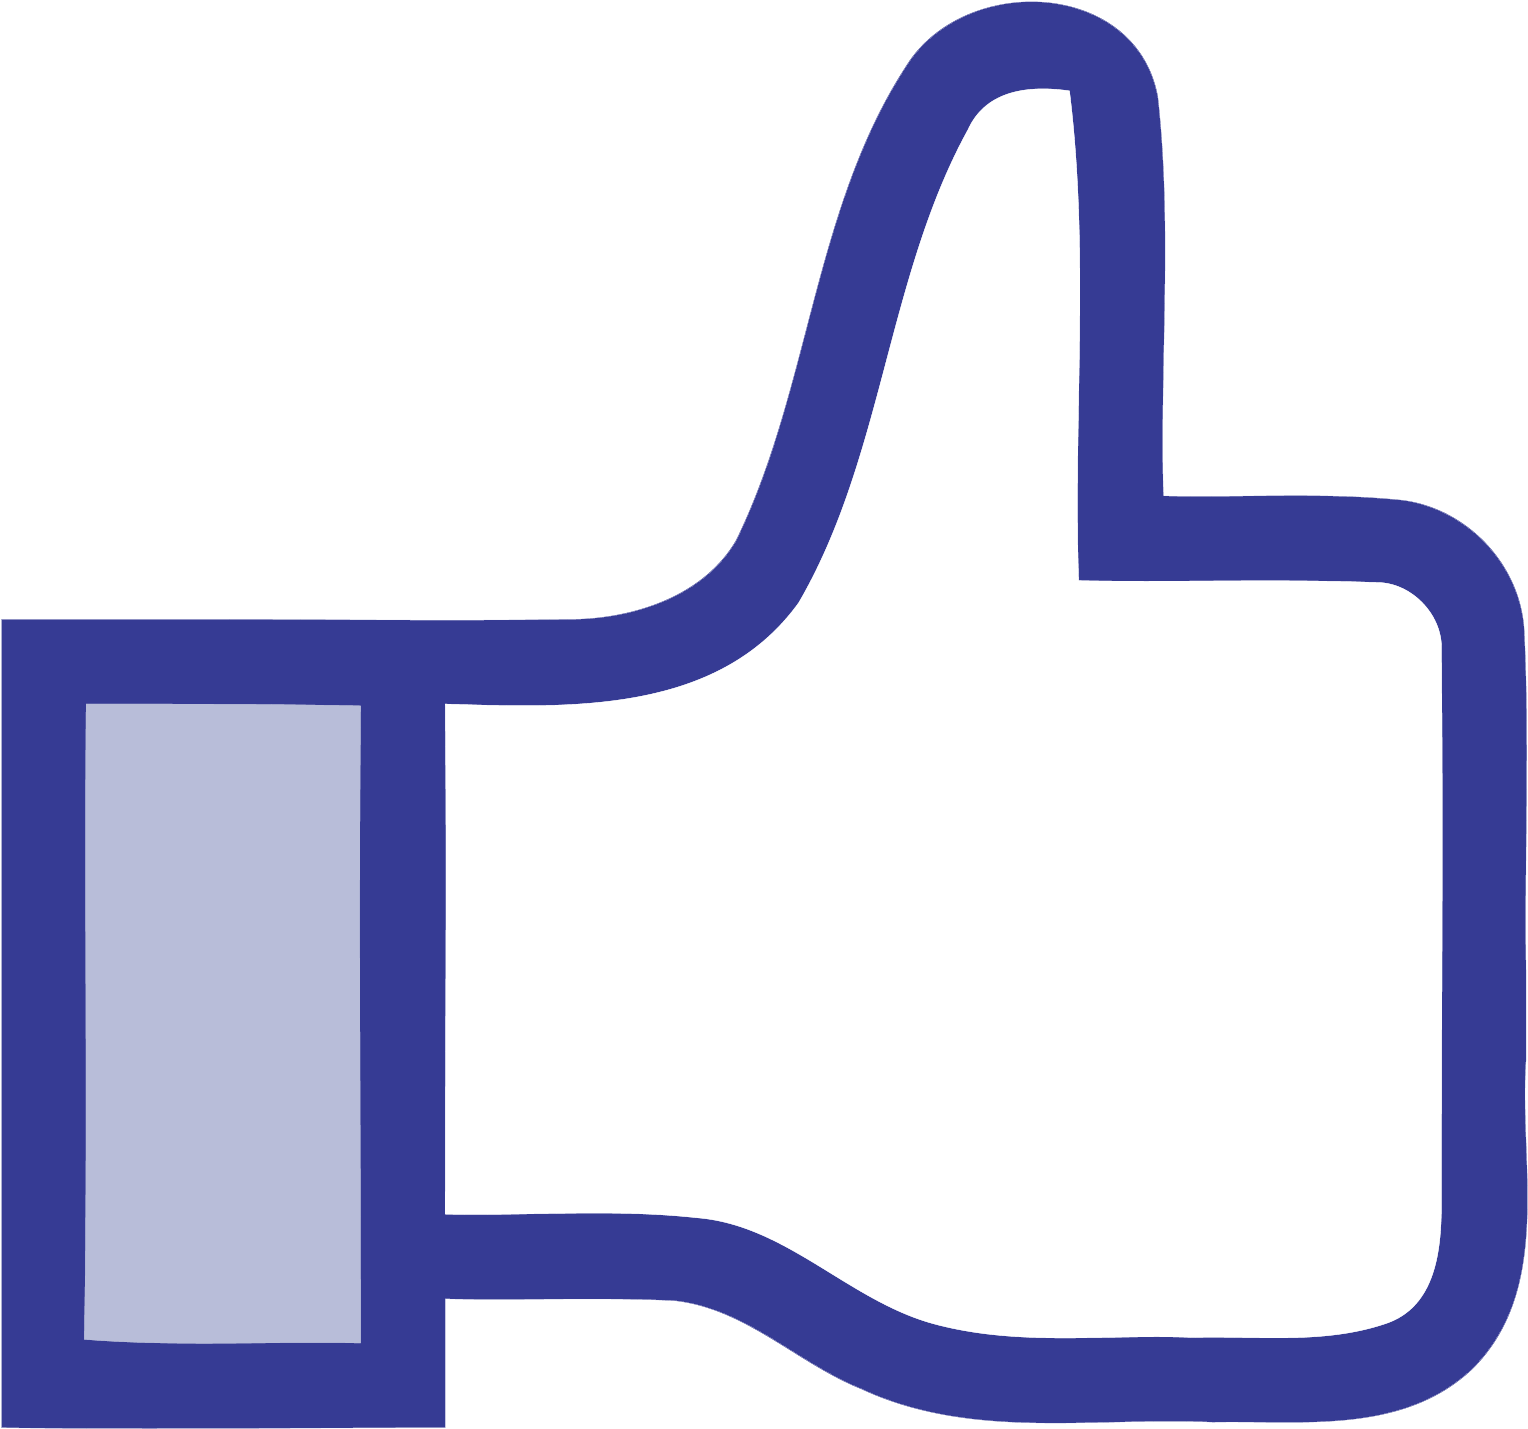 Like Button PNG Image File